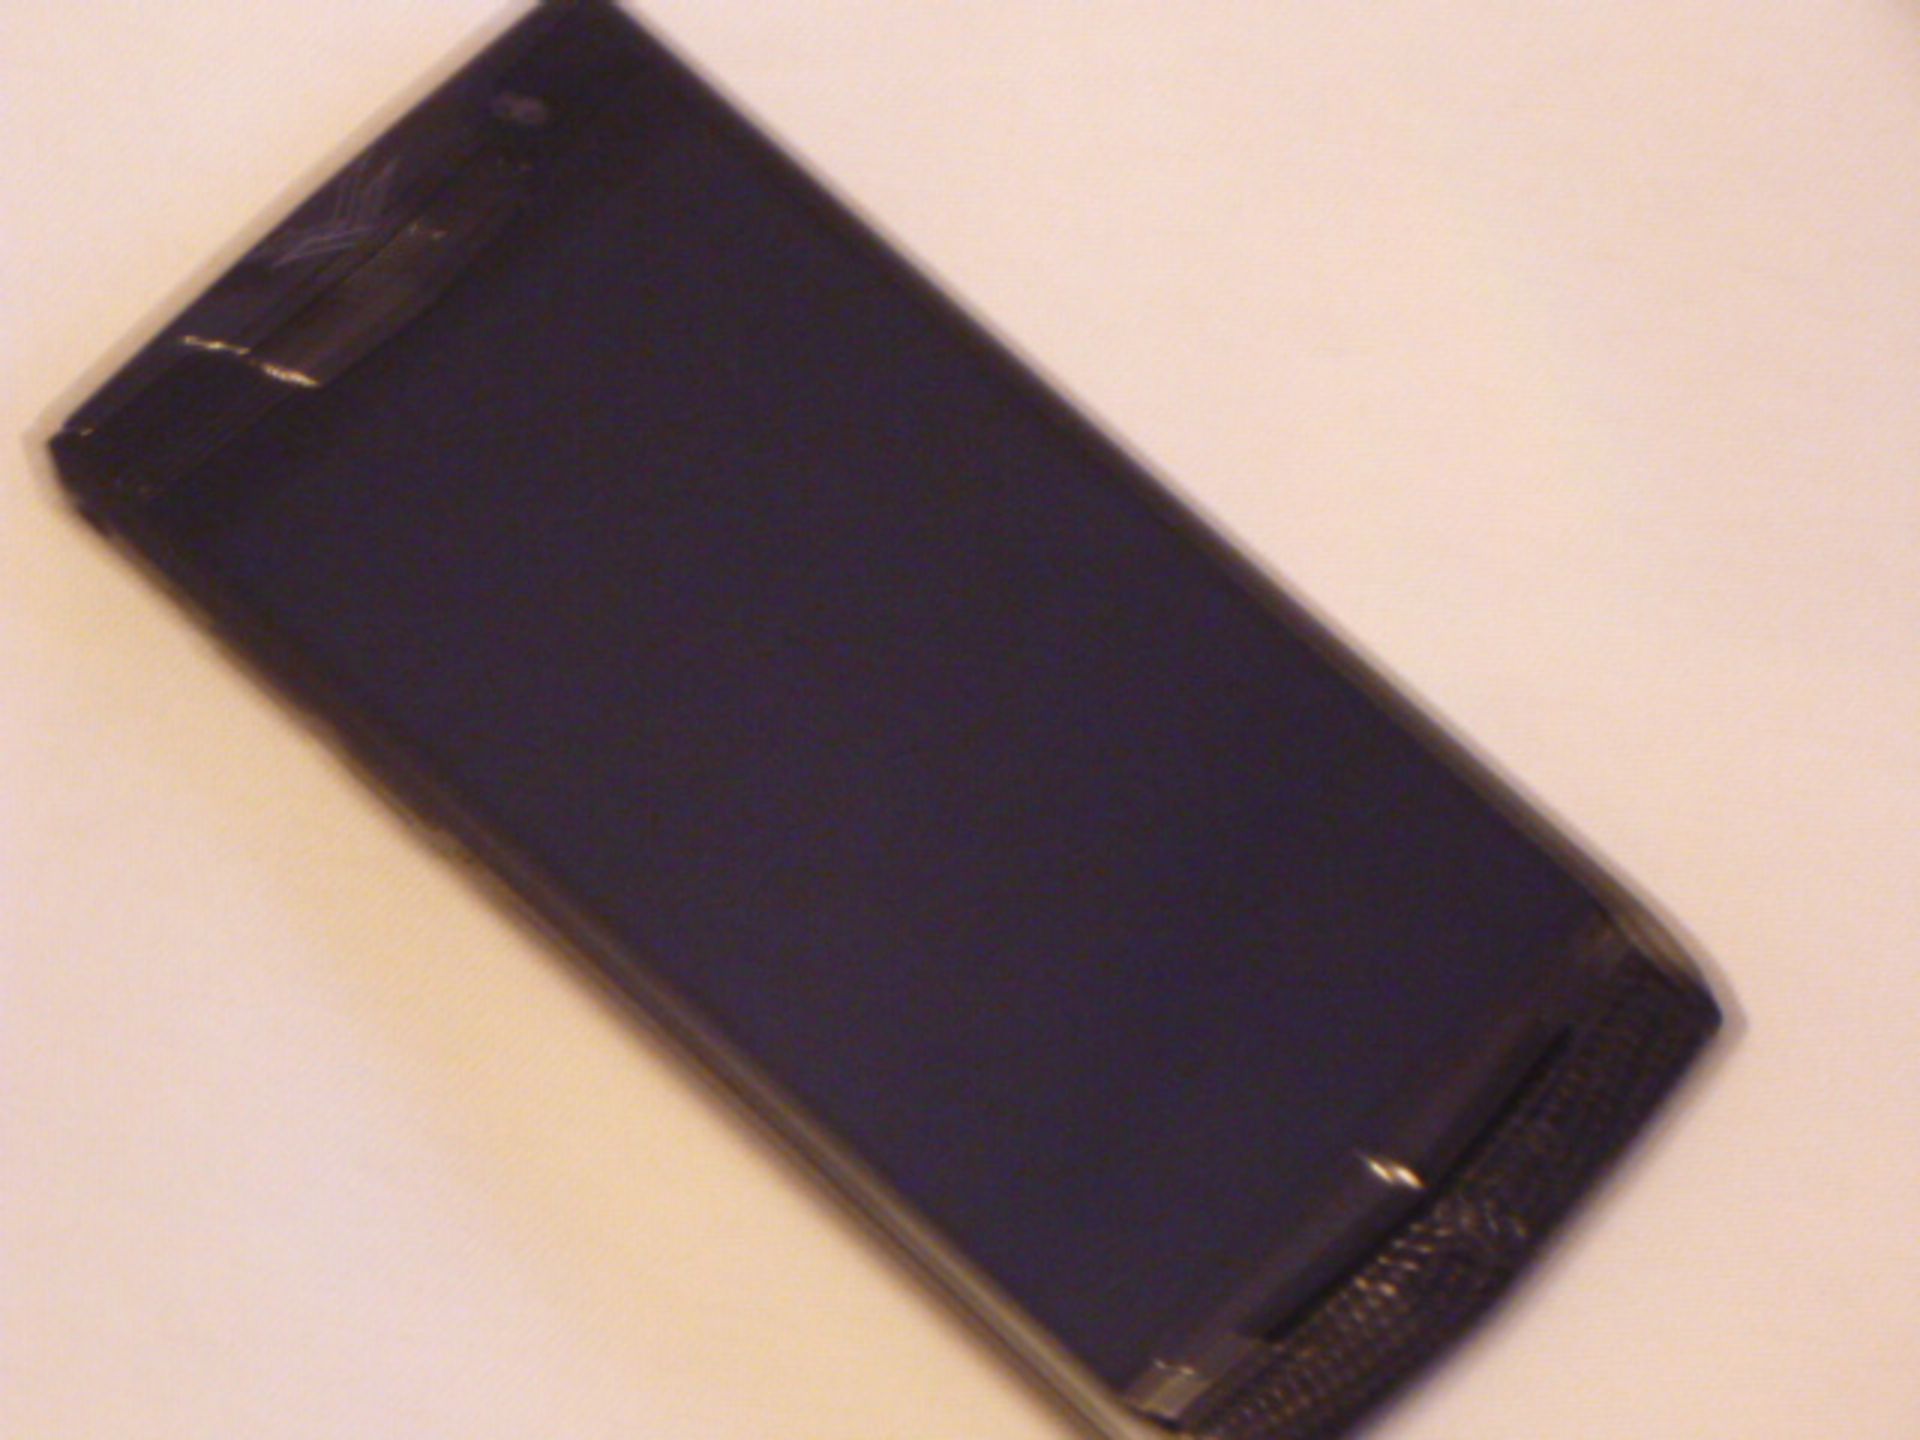 Vertu Signature Touch Jet Lizard Phone. S/N 3-023121. Comes with Sales Pack & Charging - Image 2 of 2